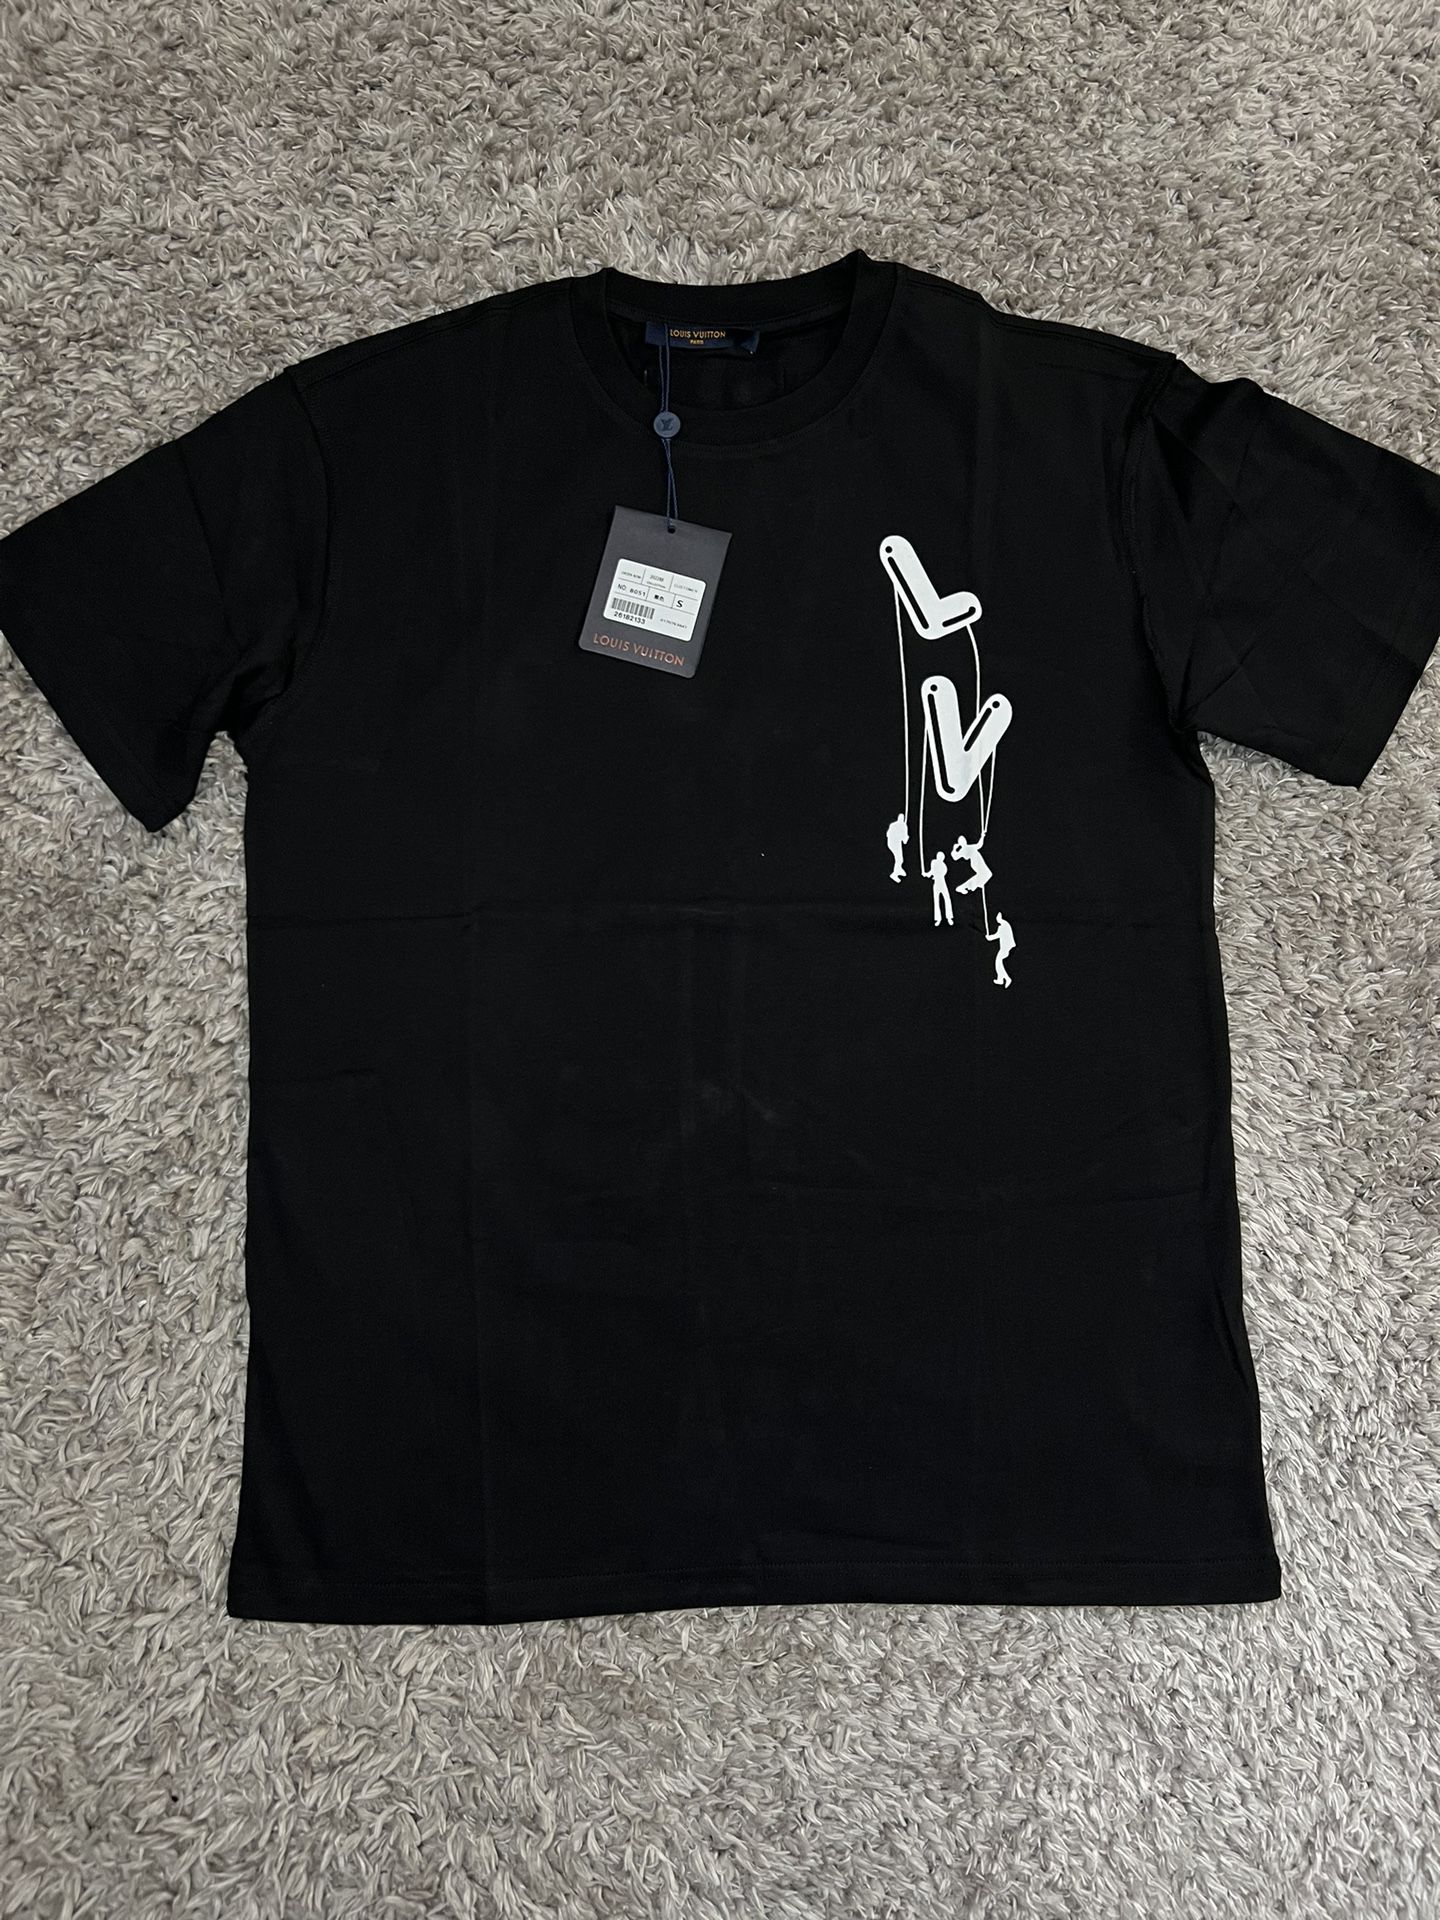 T Shirt LV size S for Sale in Hollywood, FL - OfferUp